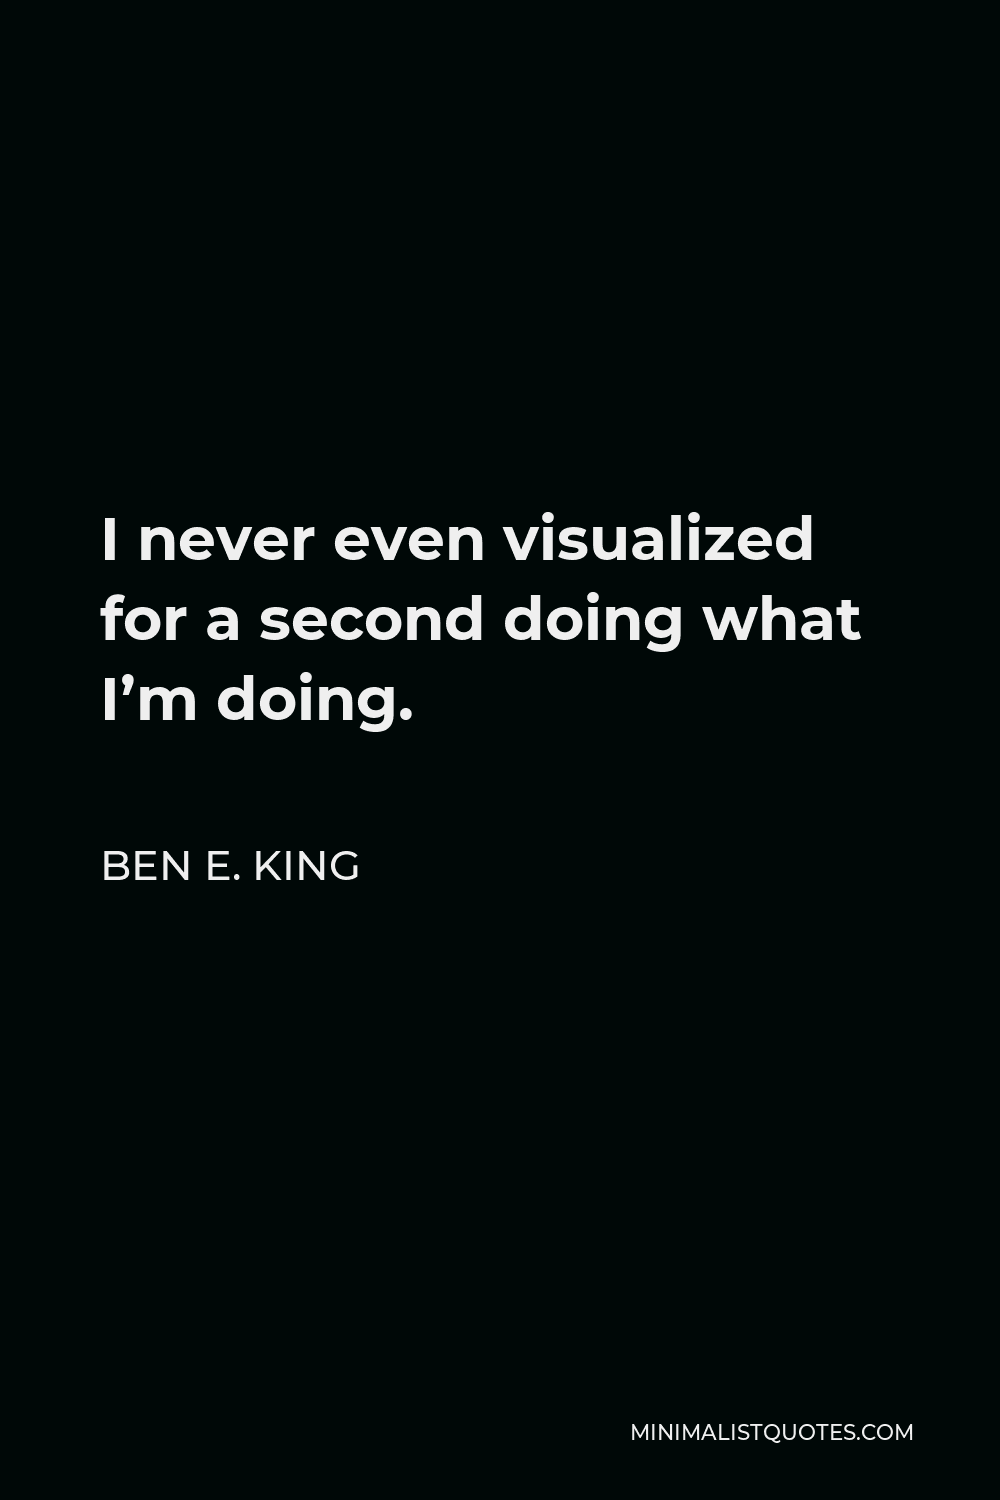 Ben E. King Quote - I never even visualized for a second doing what I’m doing.